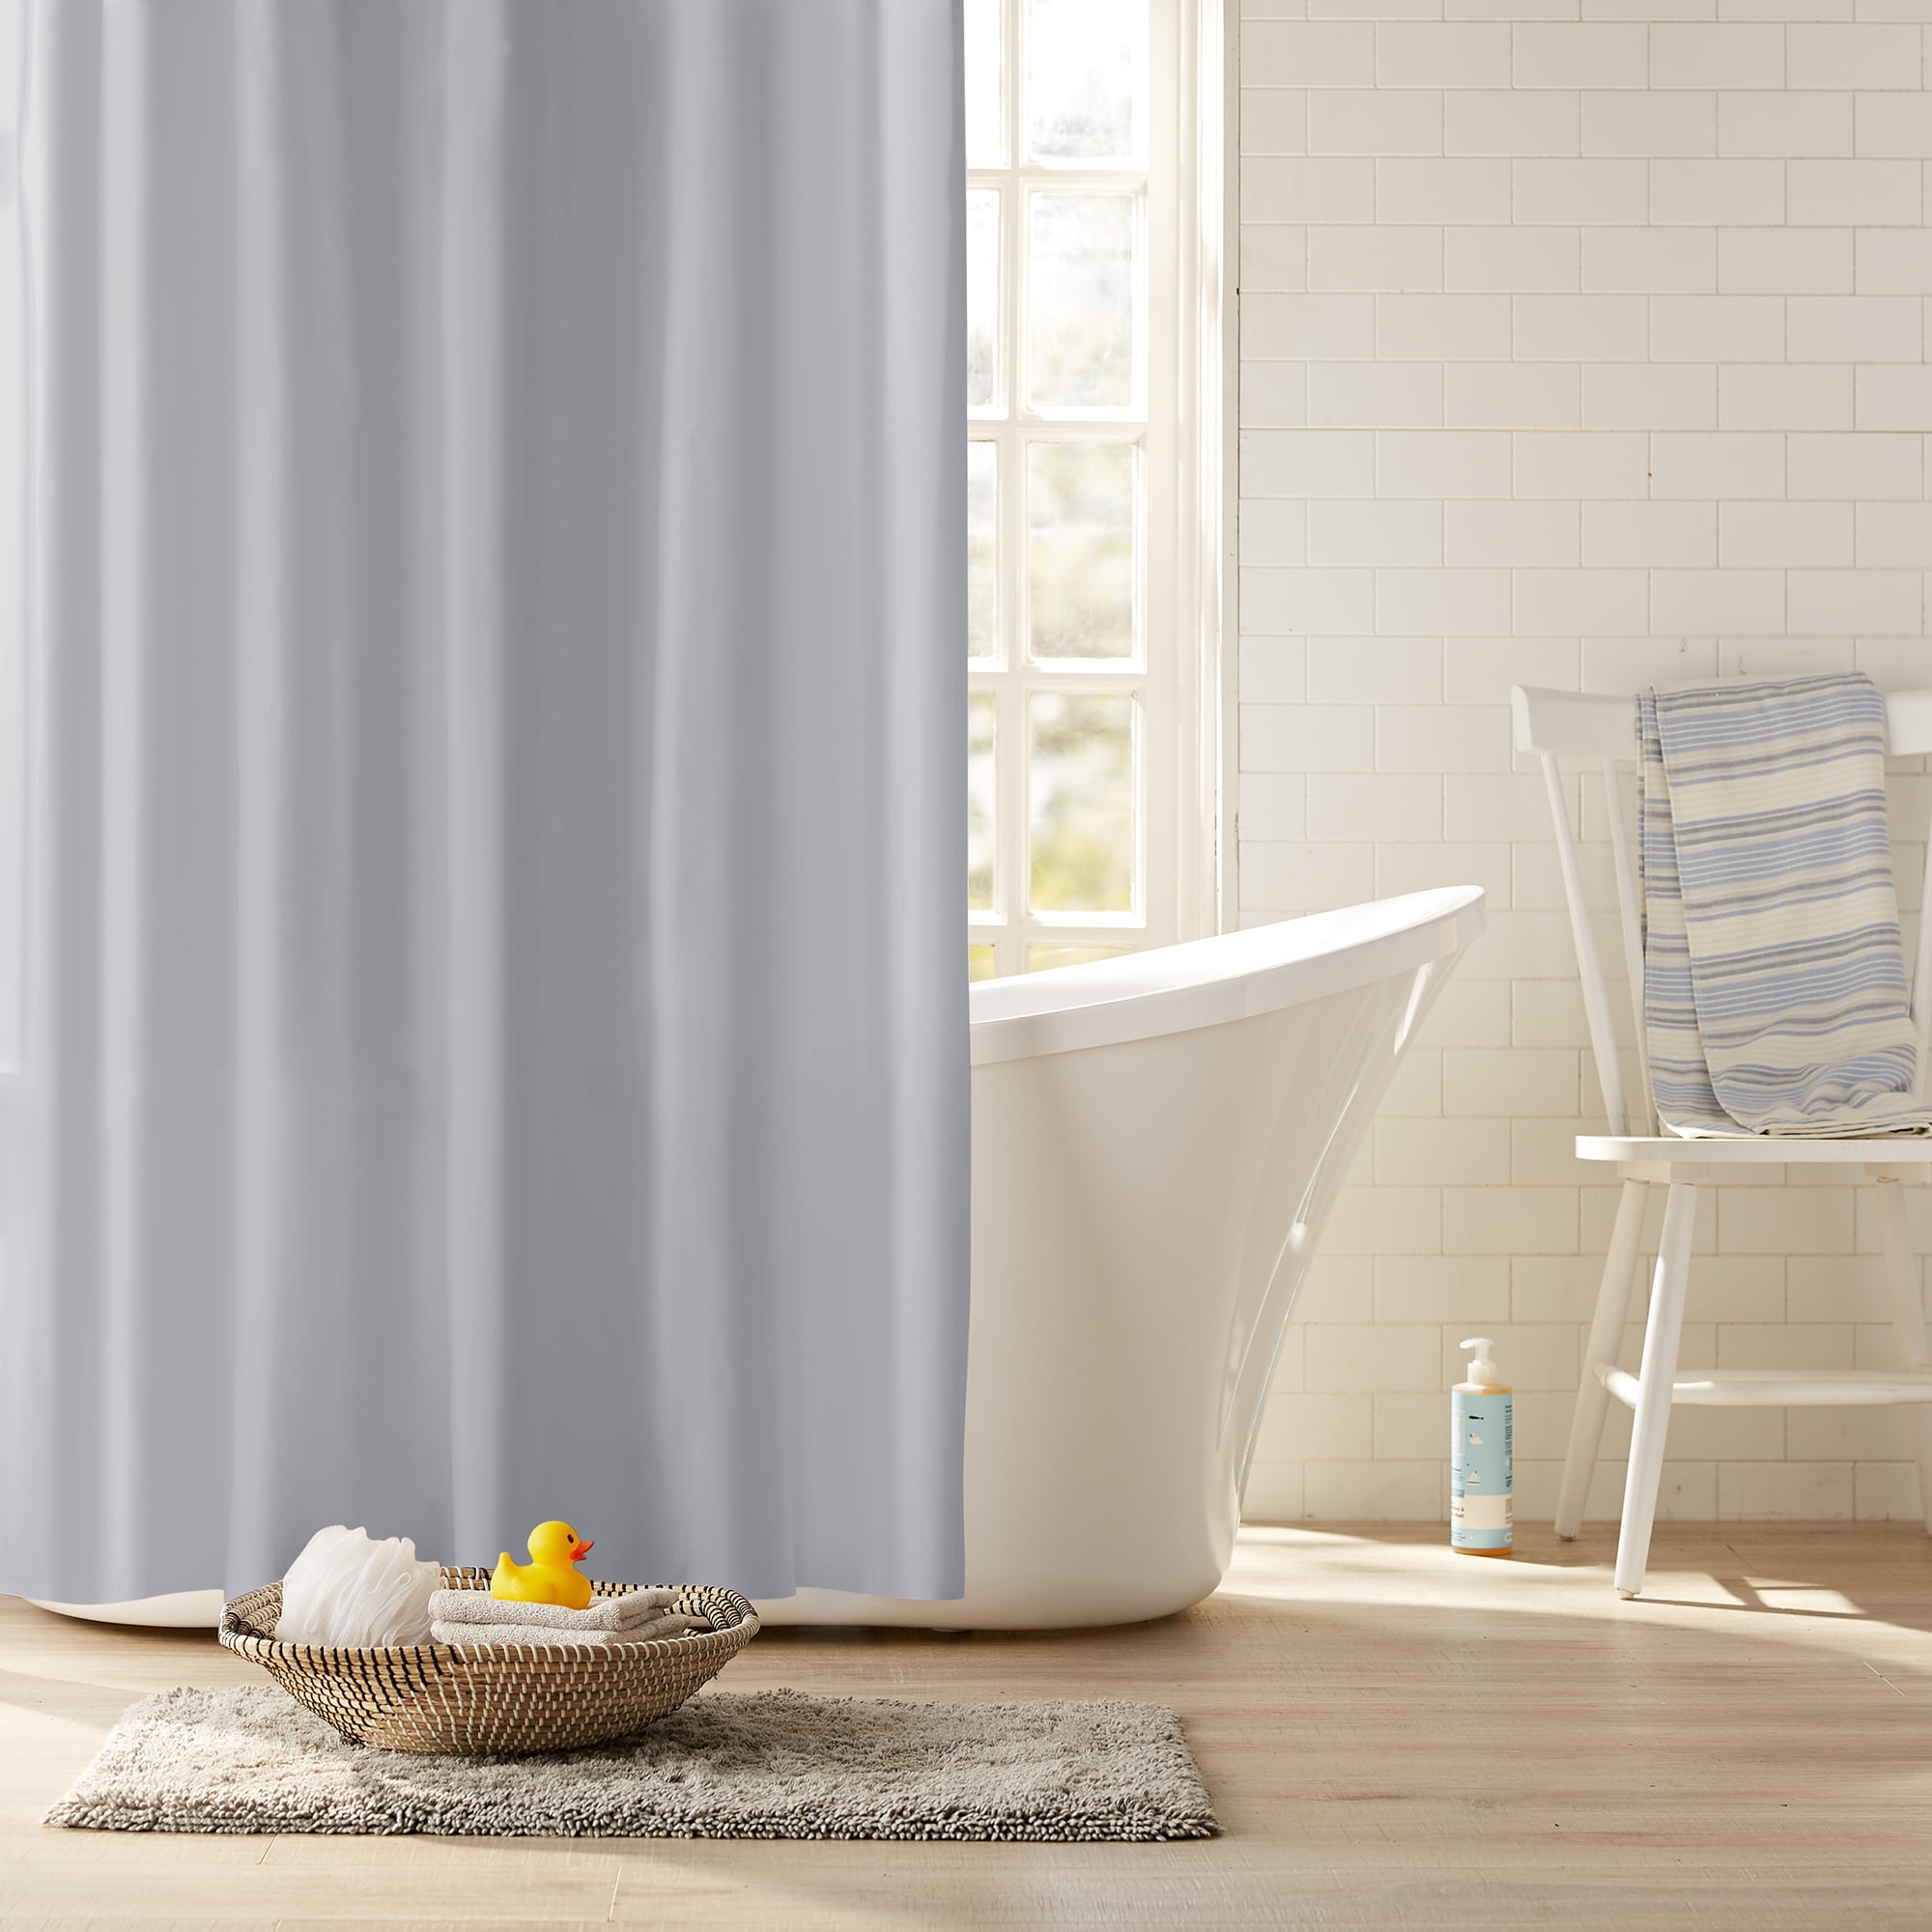 Anti-Mildew Material Machine Washable Fabric Sweet Home Collection Curtain Fun Designs for Shower Stalls & Bathtubs Standard Water Resistant Silver Easy Hang 72 x 70